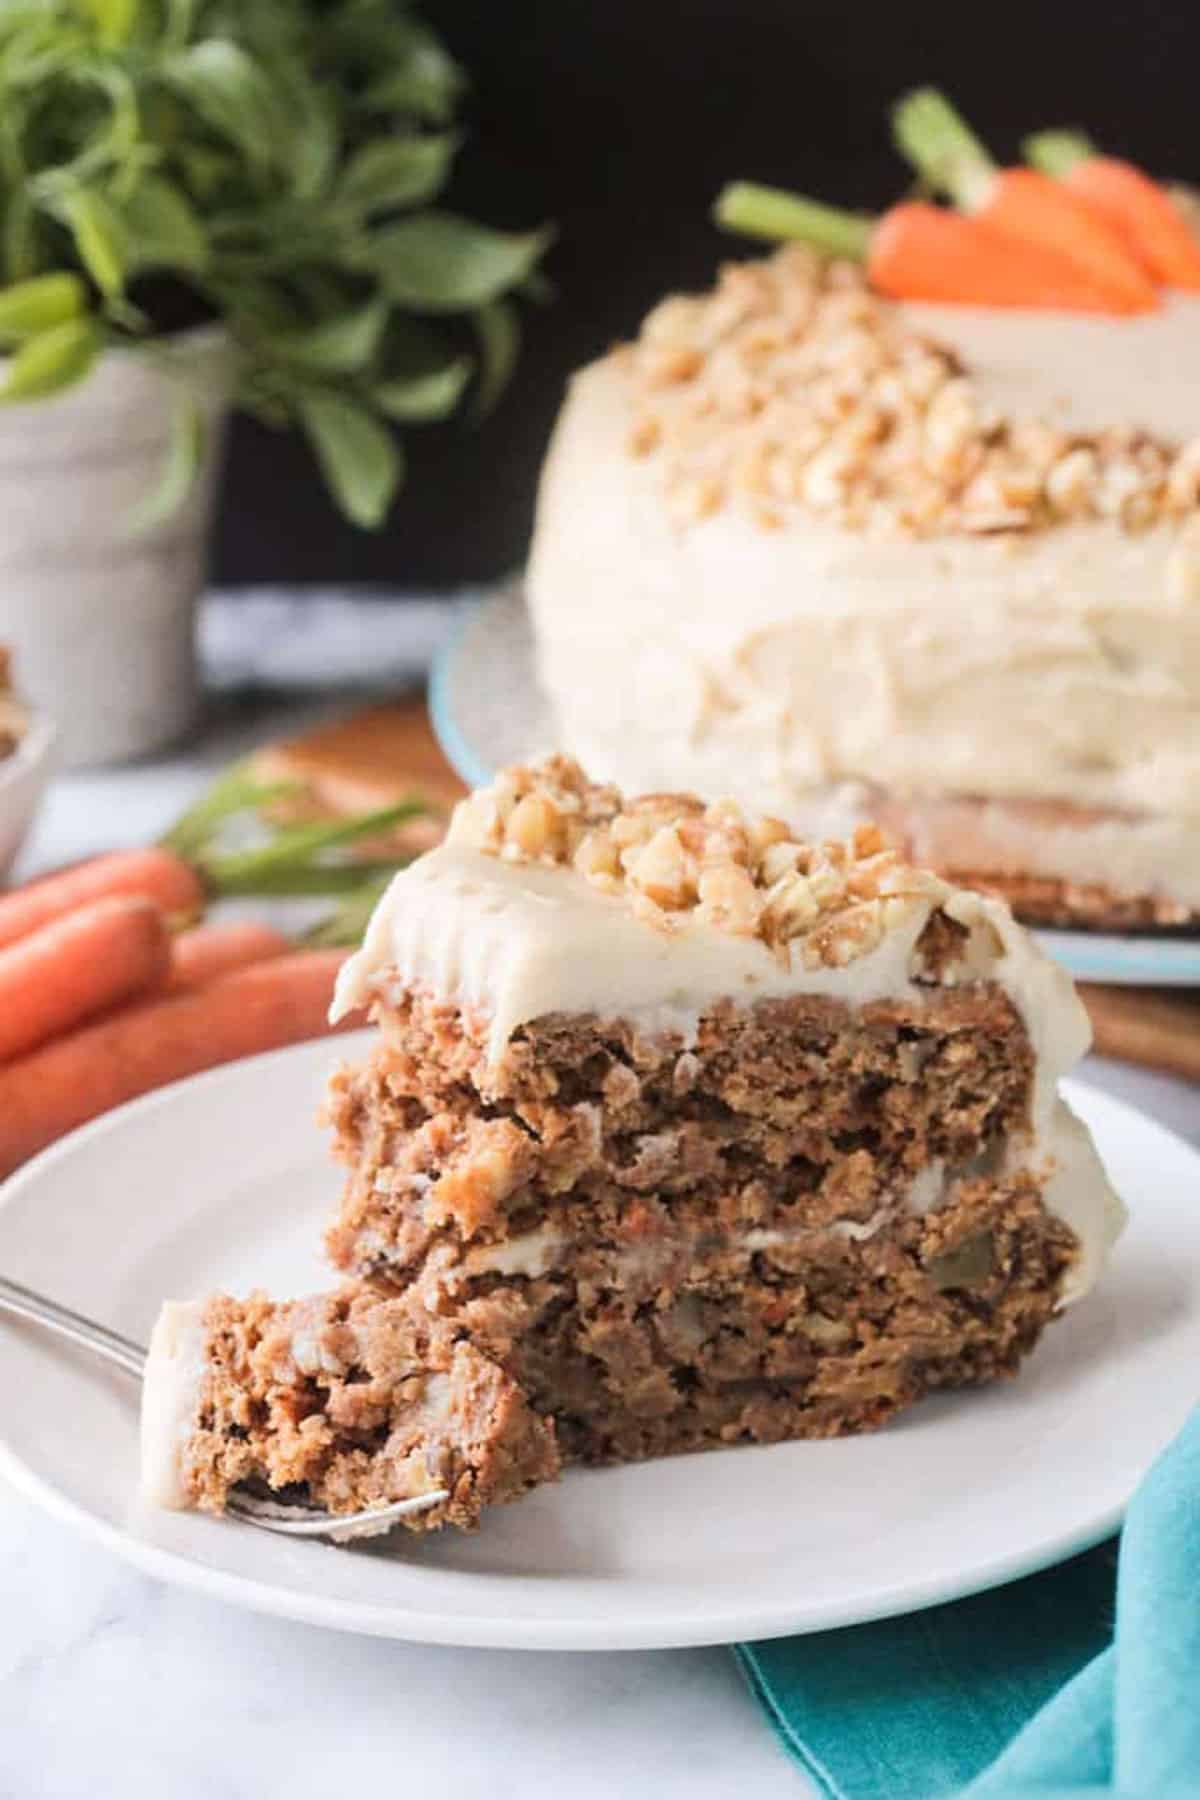 A bite of carrot cake on a fork in front of a slice of cake.